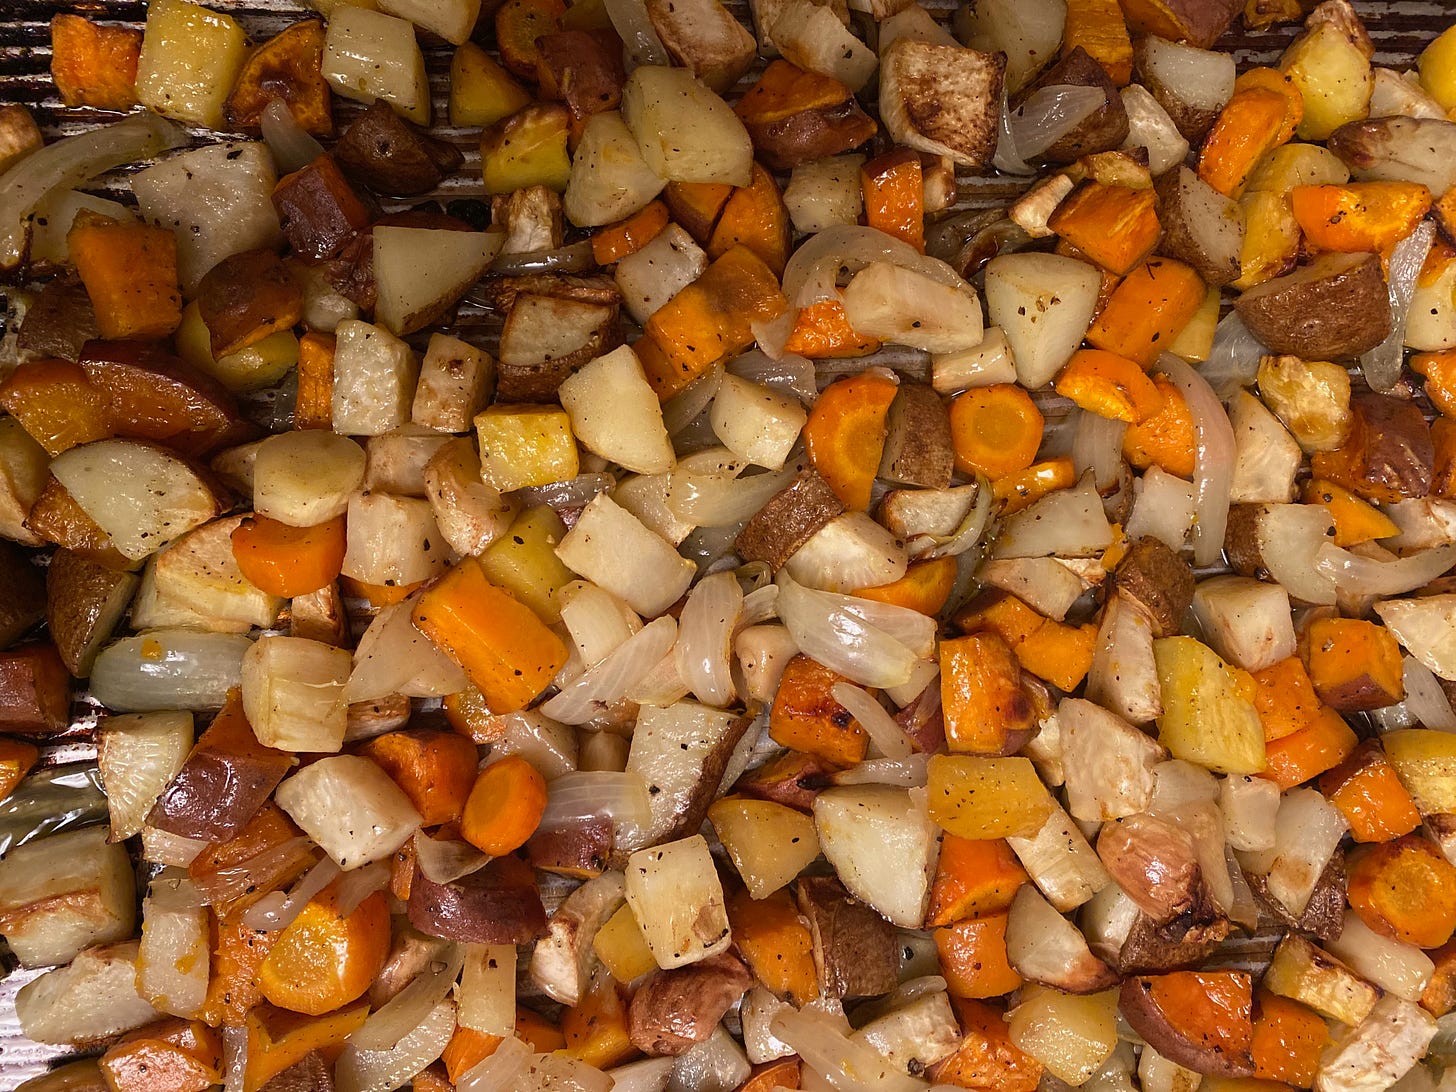 Closeup of a pan of roasted roots—carrots, turnips, potatoes, parsnips, sweet potatoes, wedges of onion, and whole garlic cloves.